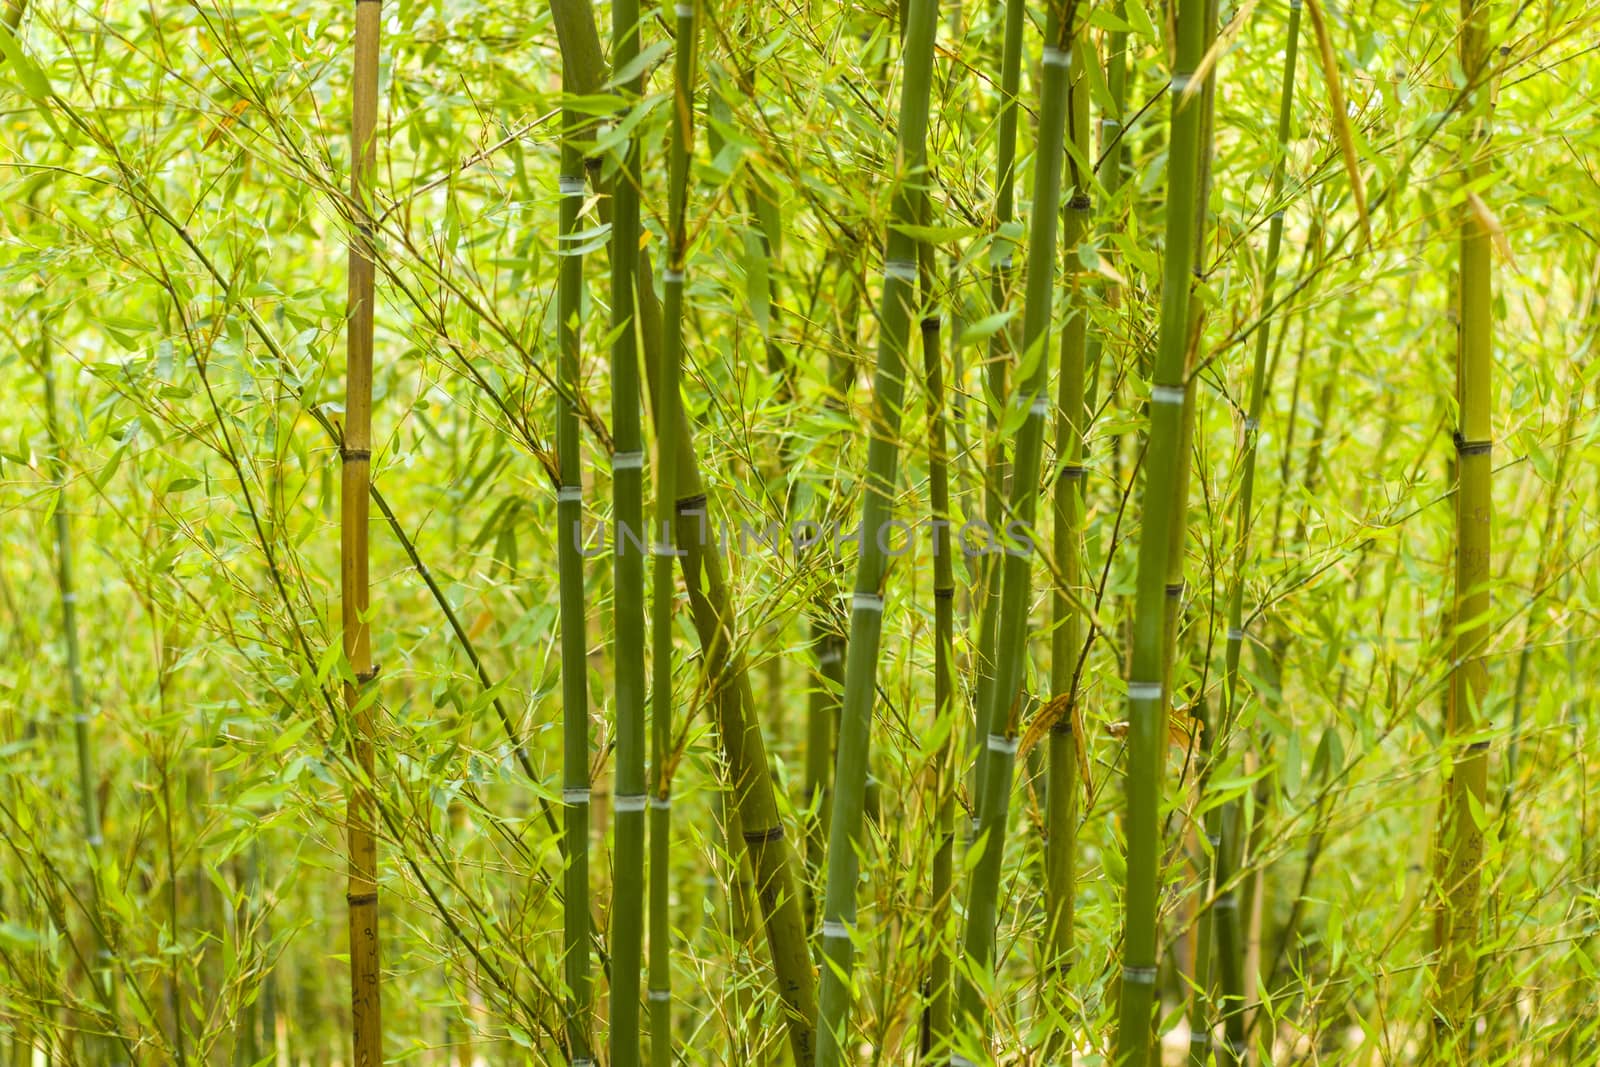 Bamboo forest background and view, landscape of green bamboo